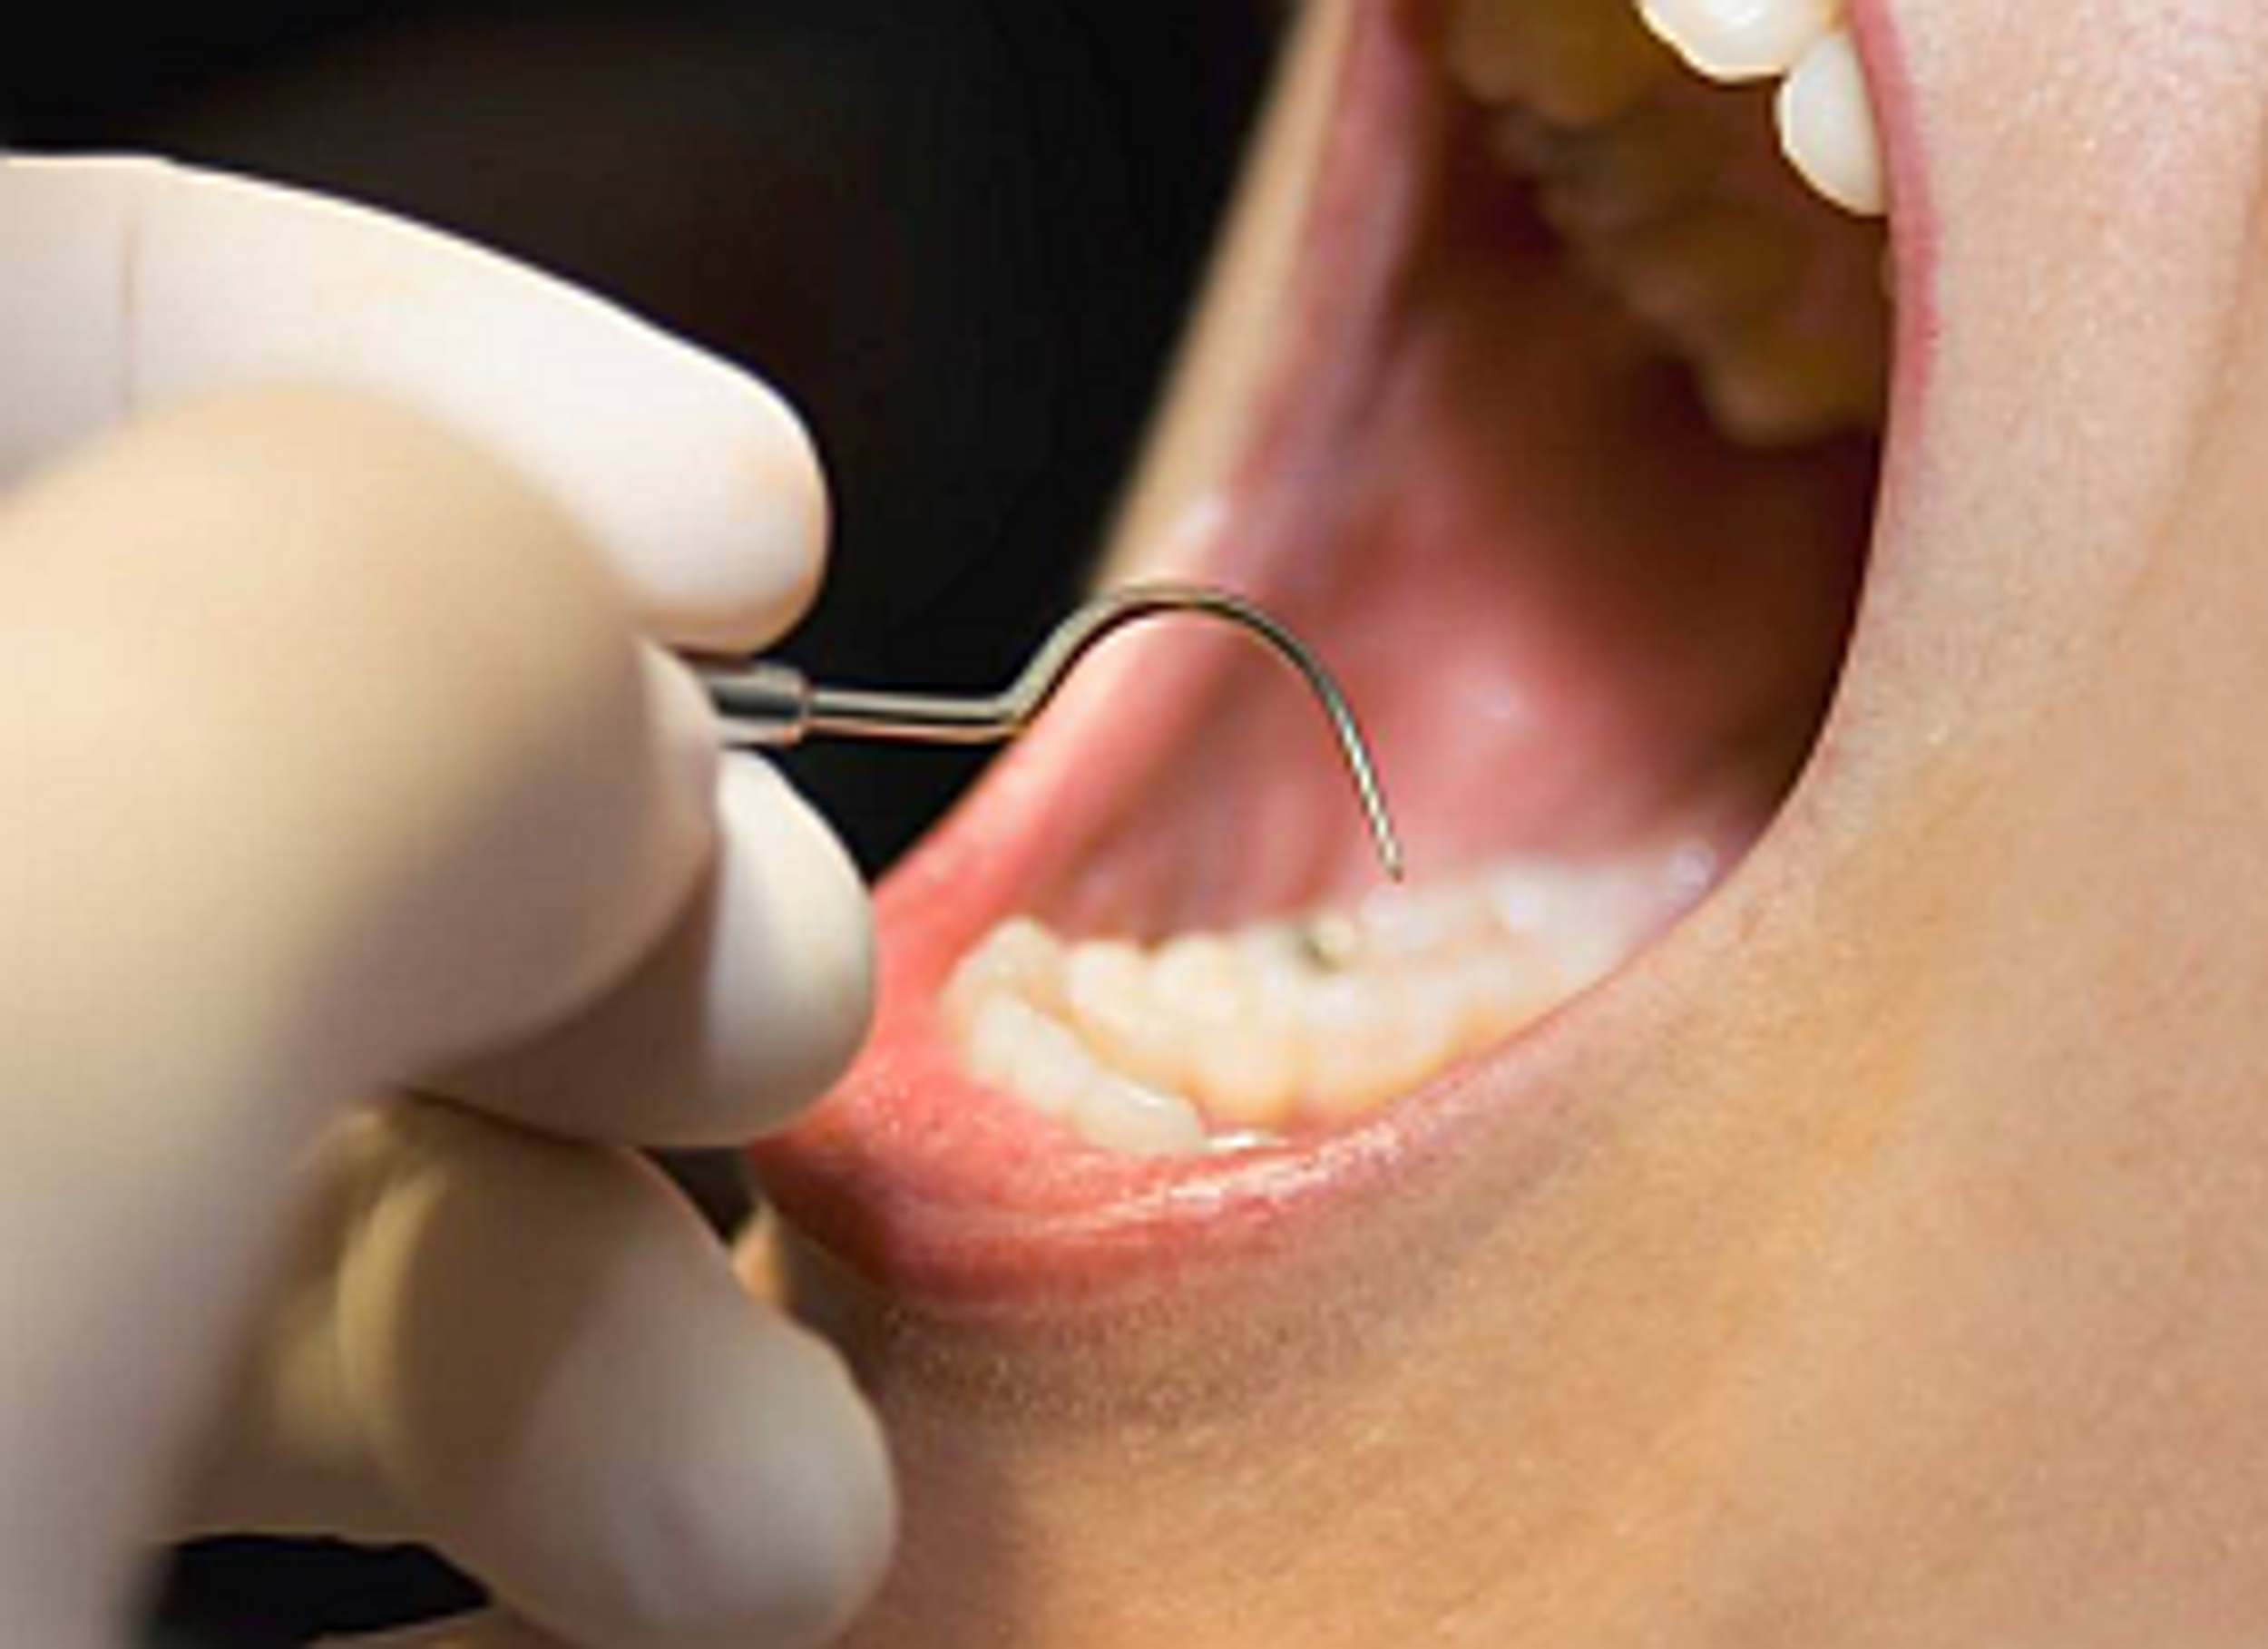 Nanocomposite Fillings Kill Bacteria and Regenerate the Tooth